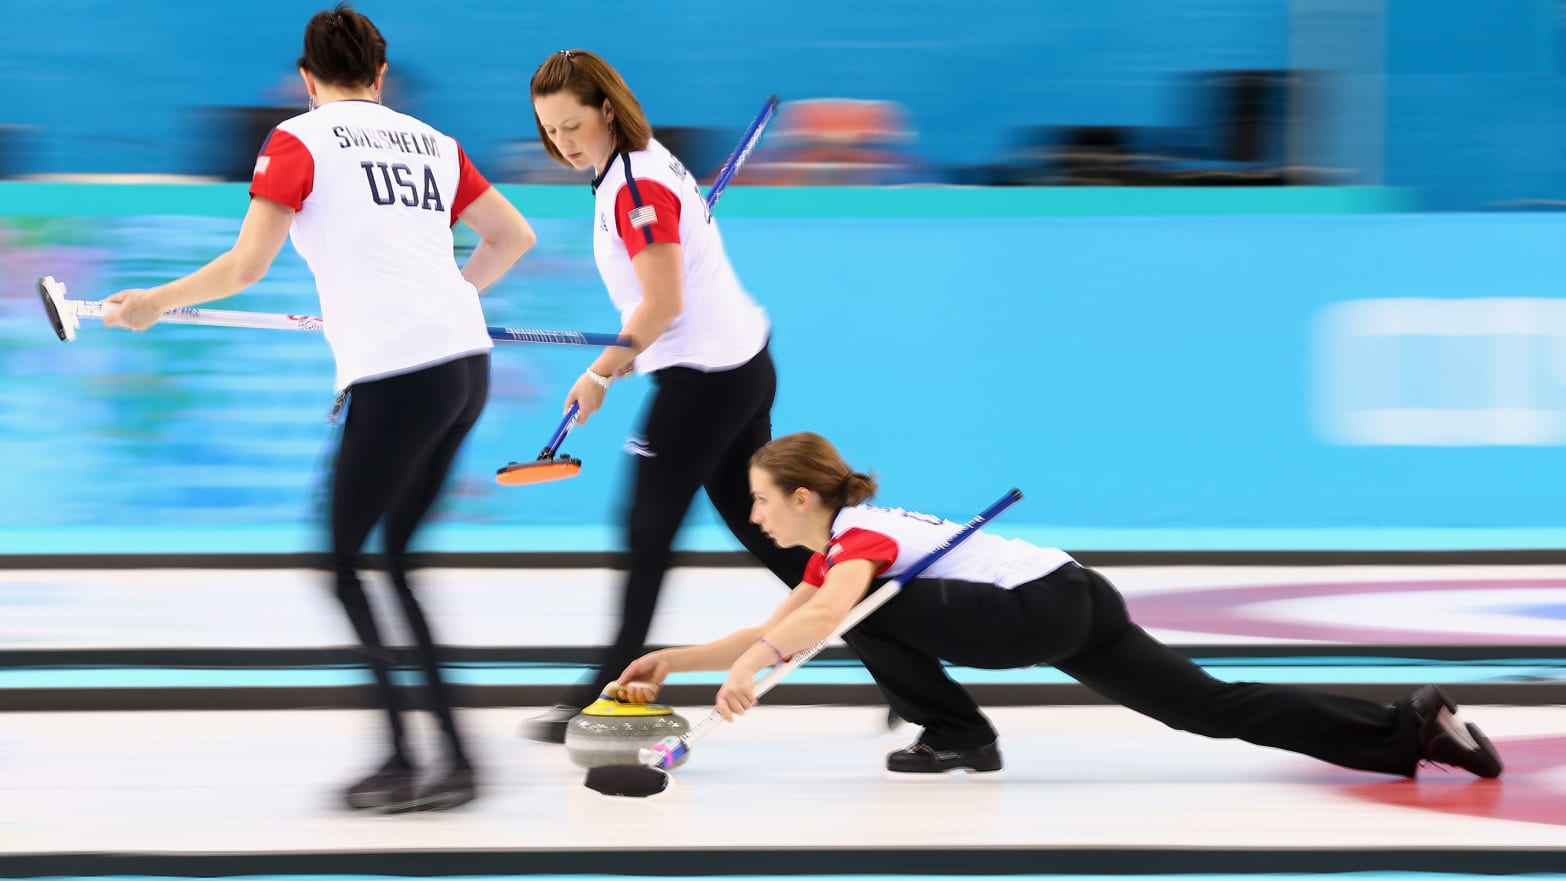 Curling 2018 Olympics Full Schedule, How to Watch